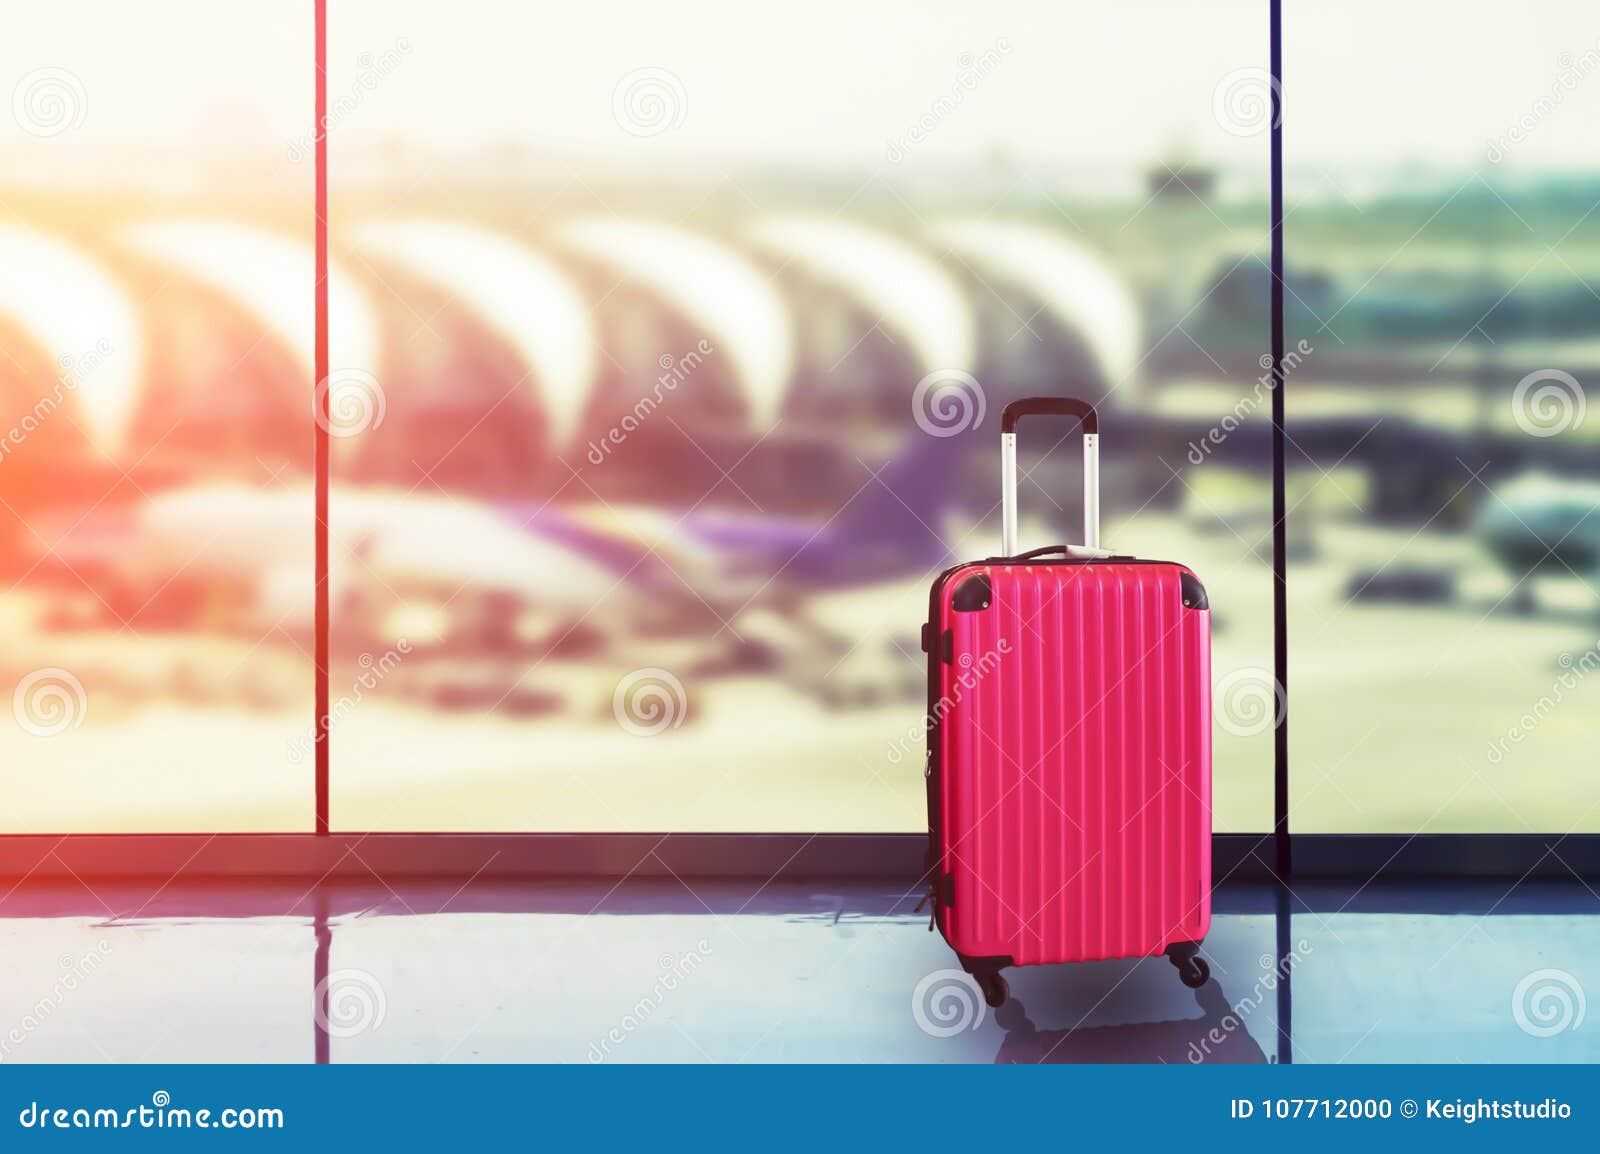 pink suitcases in airport departure lounge, airplane in background